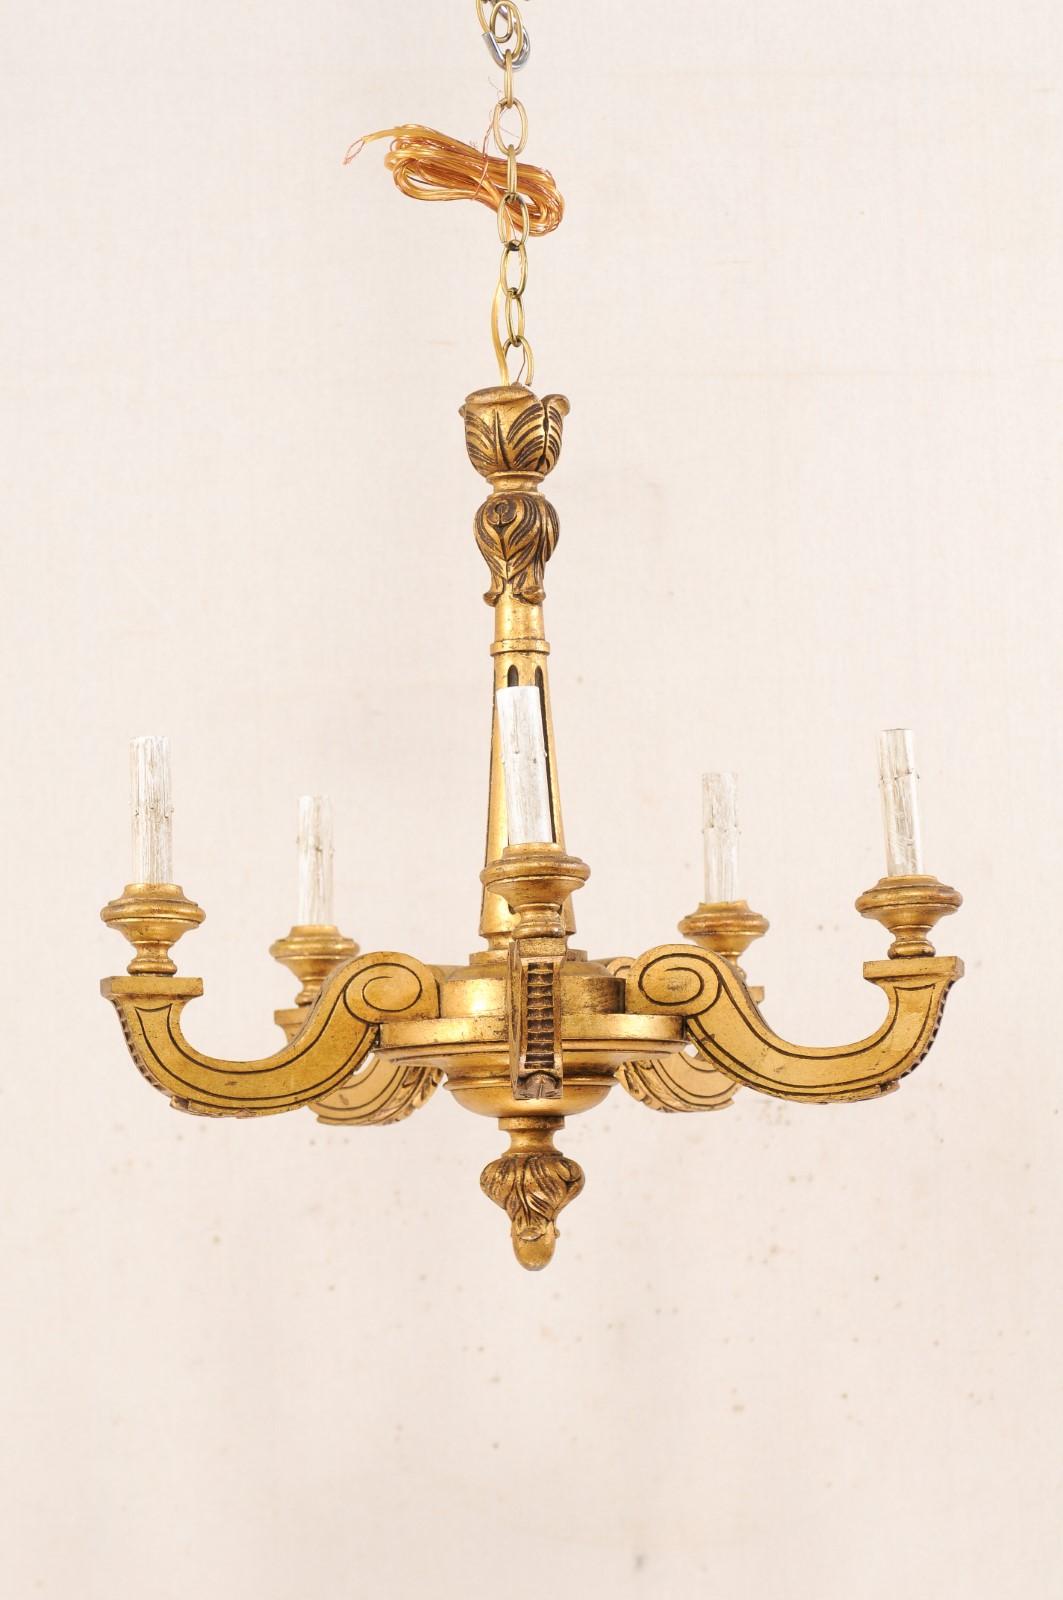 A French five-light gold tone carved-wood chandelier from the mid-20th century. This vintage chandelier from France features a rounded and fluted central column, which gradually widens towards the gallery, with leaf motif carvings at top, and